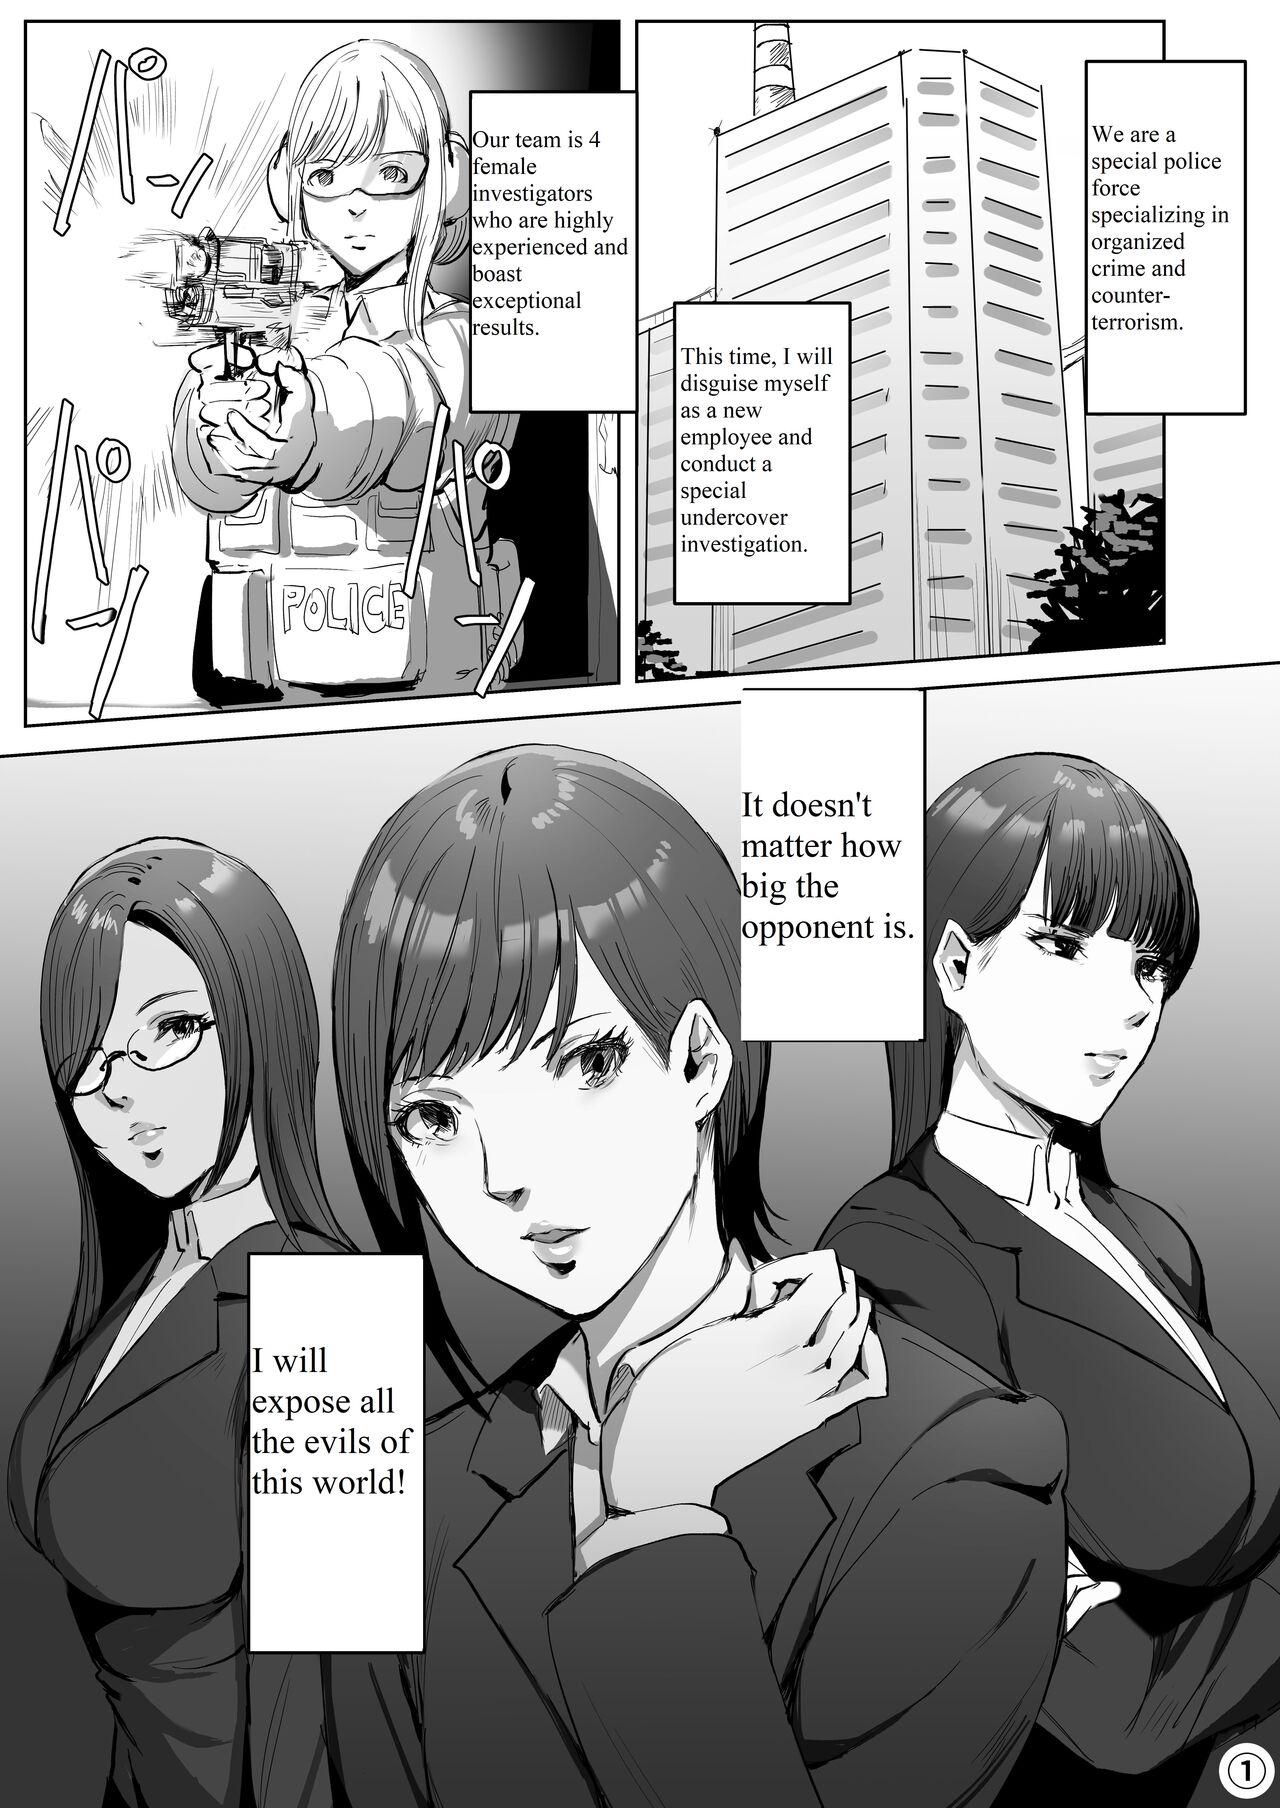 Pau Entering a Certain Tech Company, I Was Made to Inherit an Futa-Android. - Original Office - Page 2